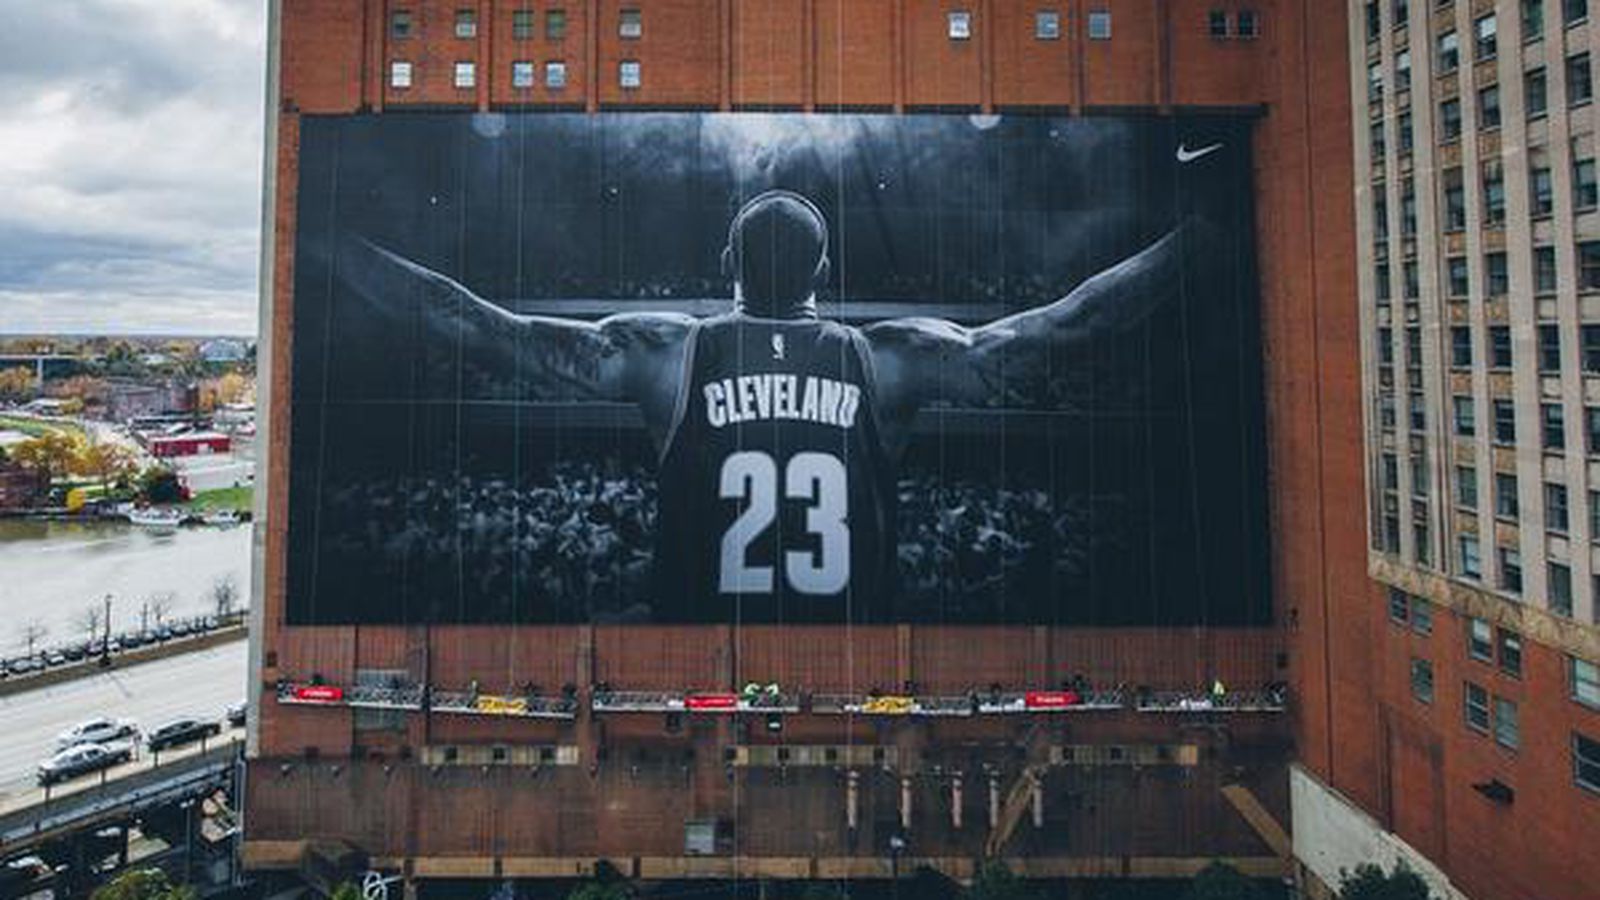 Get a look at Cleveland's new LeBron James banners - SBNation.com